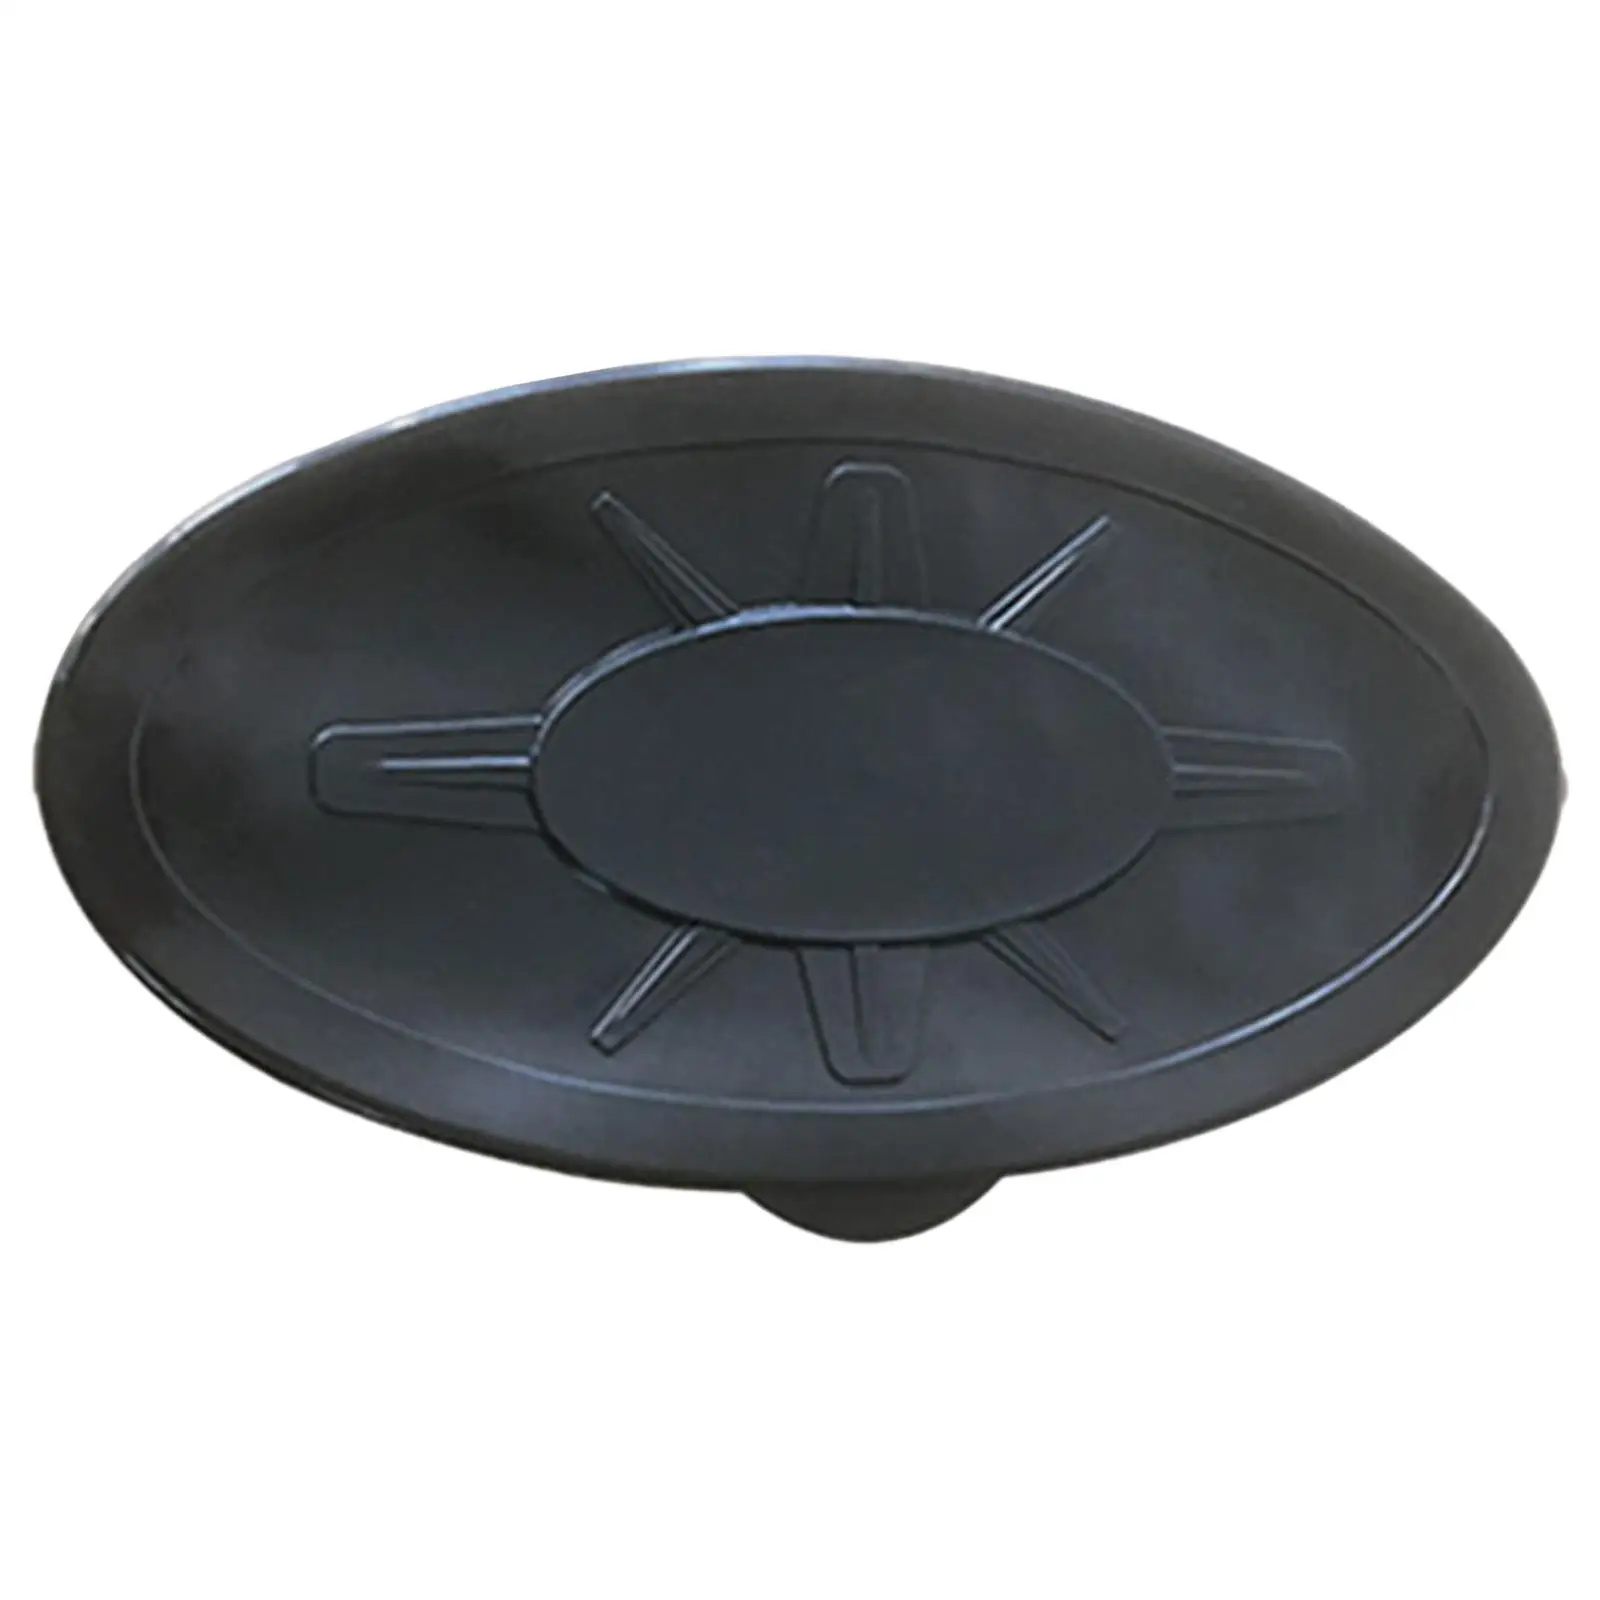 Kayak Hatches Boat Sealing Hatch Round/Oval Accessories Black Access Hatch Parts Replacement Hatches for Kayak Boat